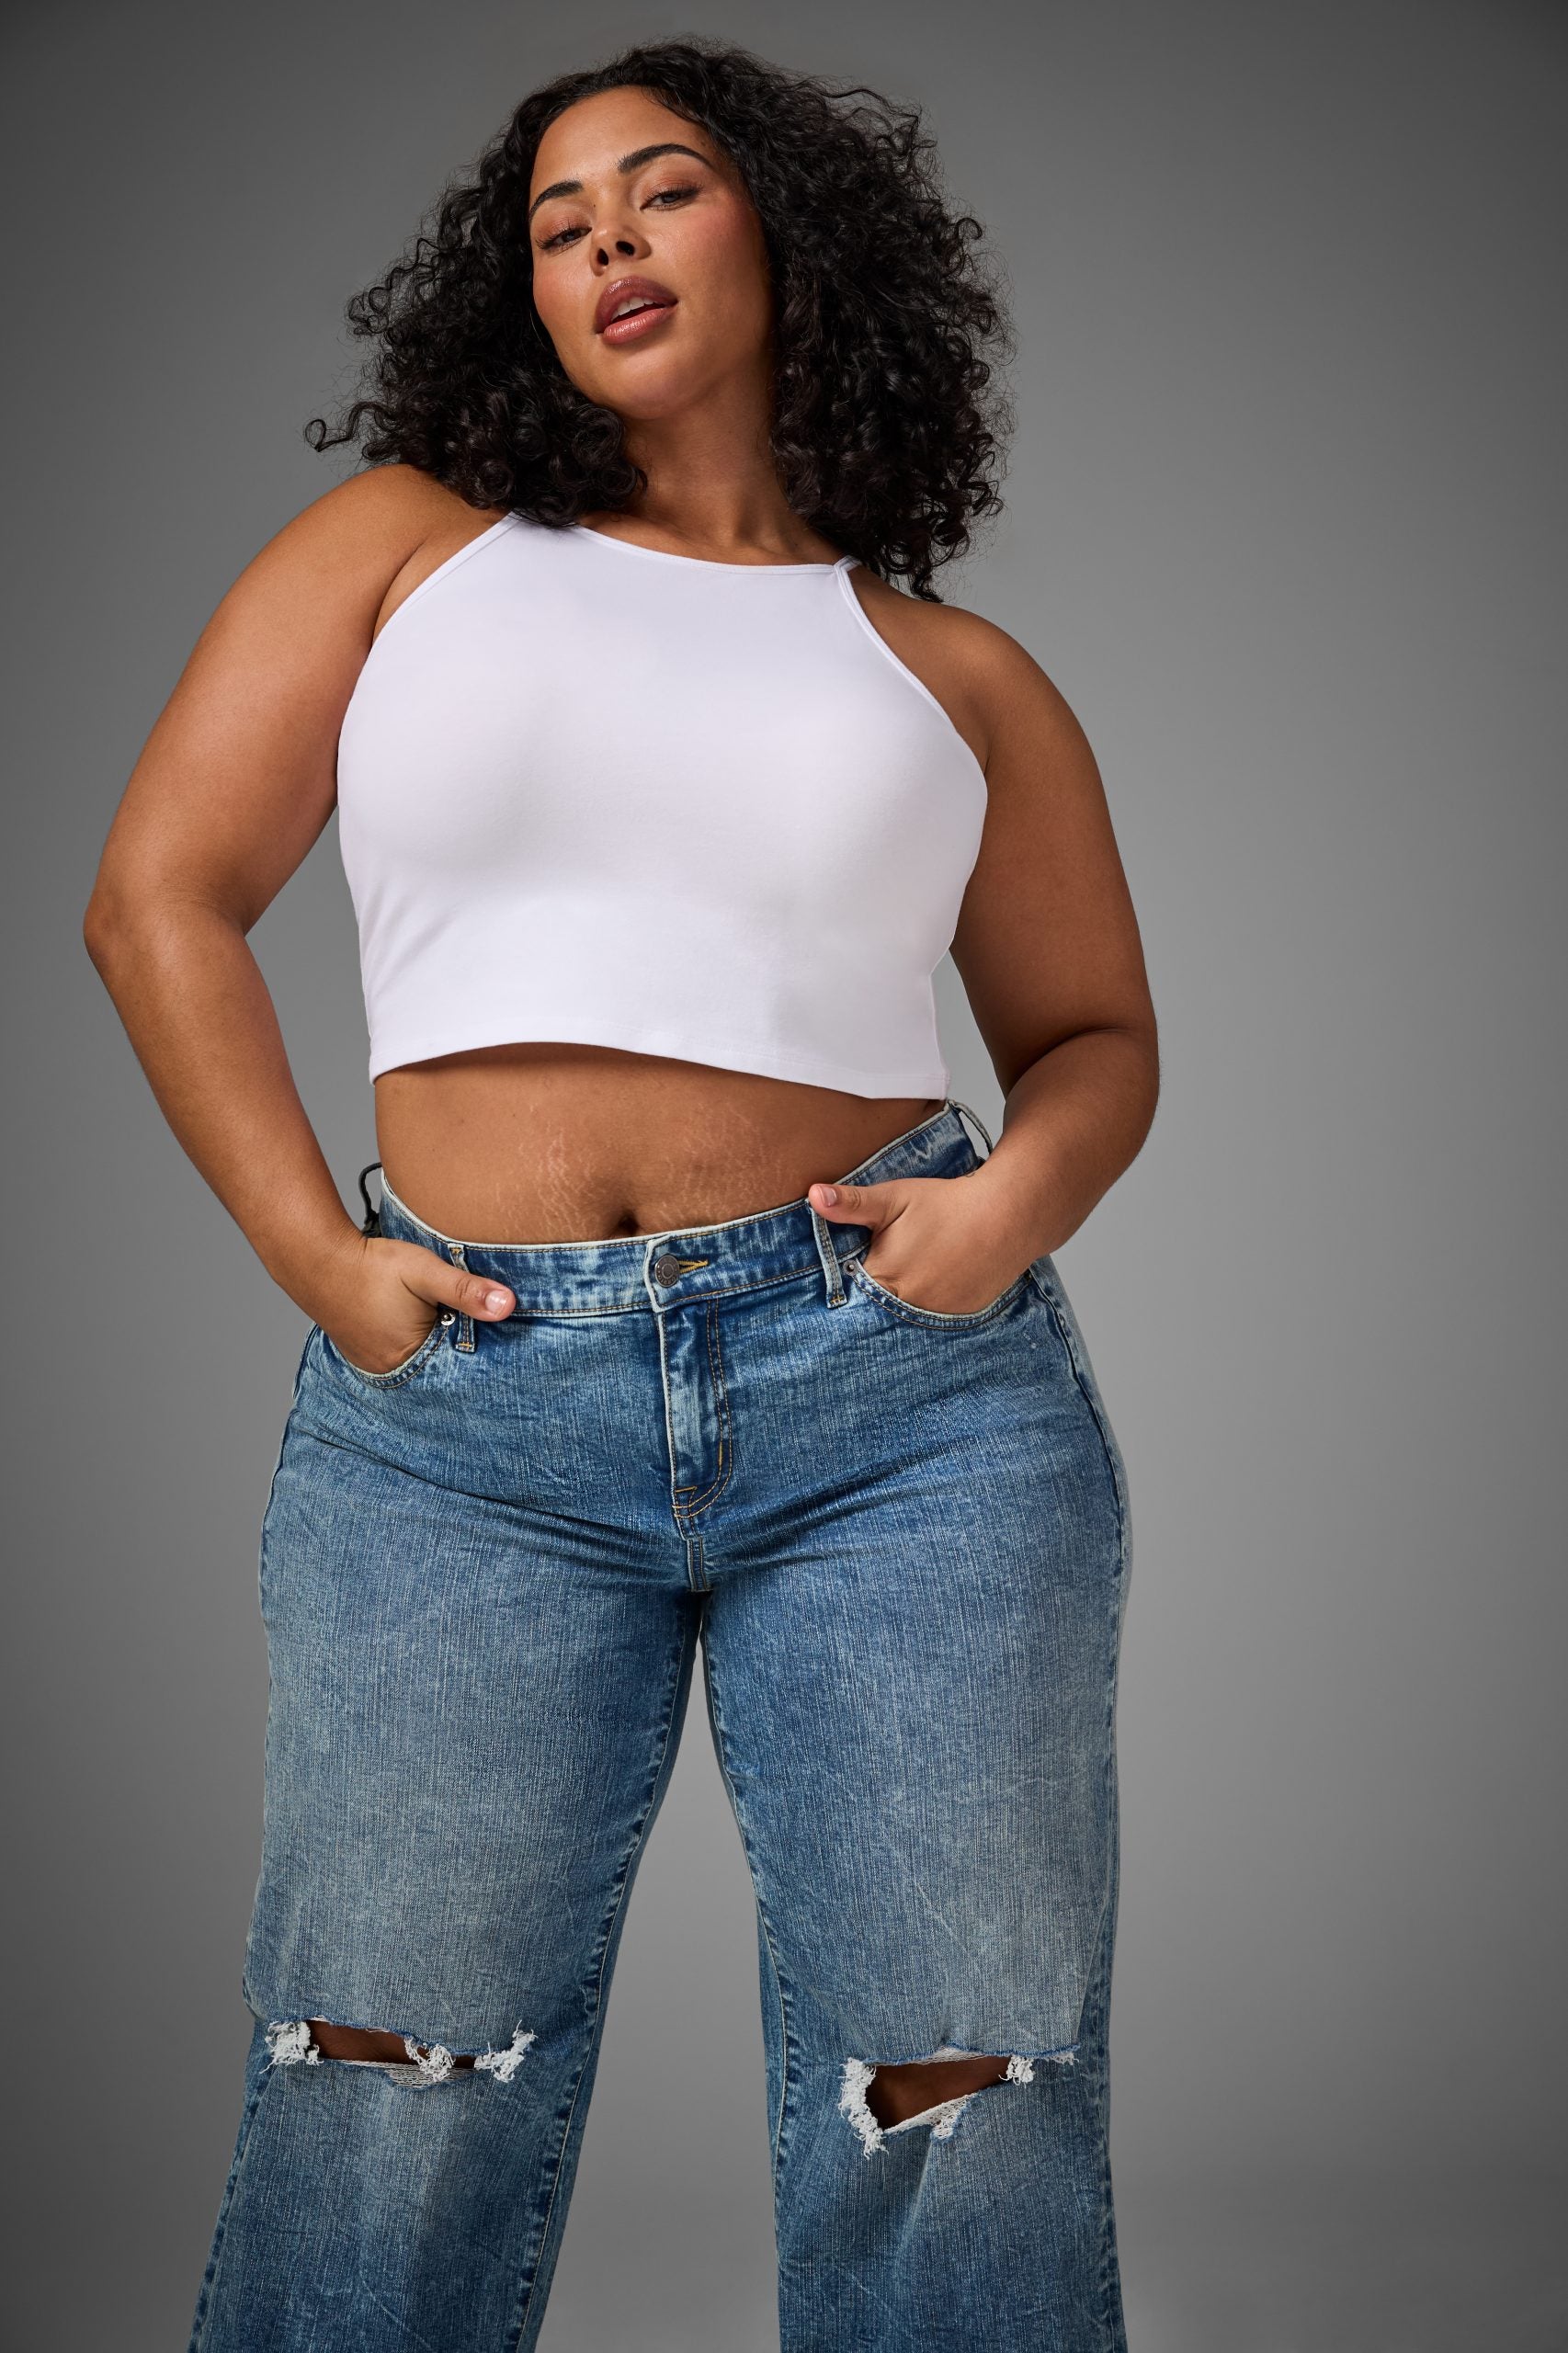 Mamas At Work: Plus-Size Model Tabria Majors Has A New Respect For Her Body After Having Her First Child